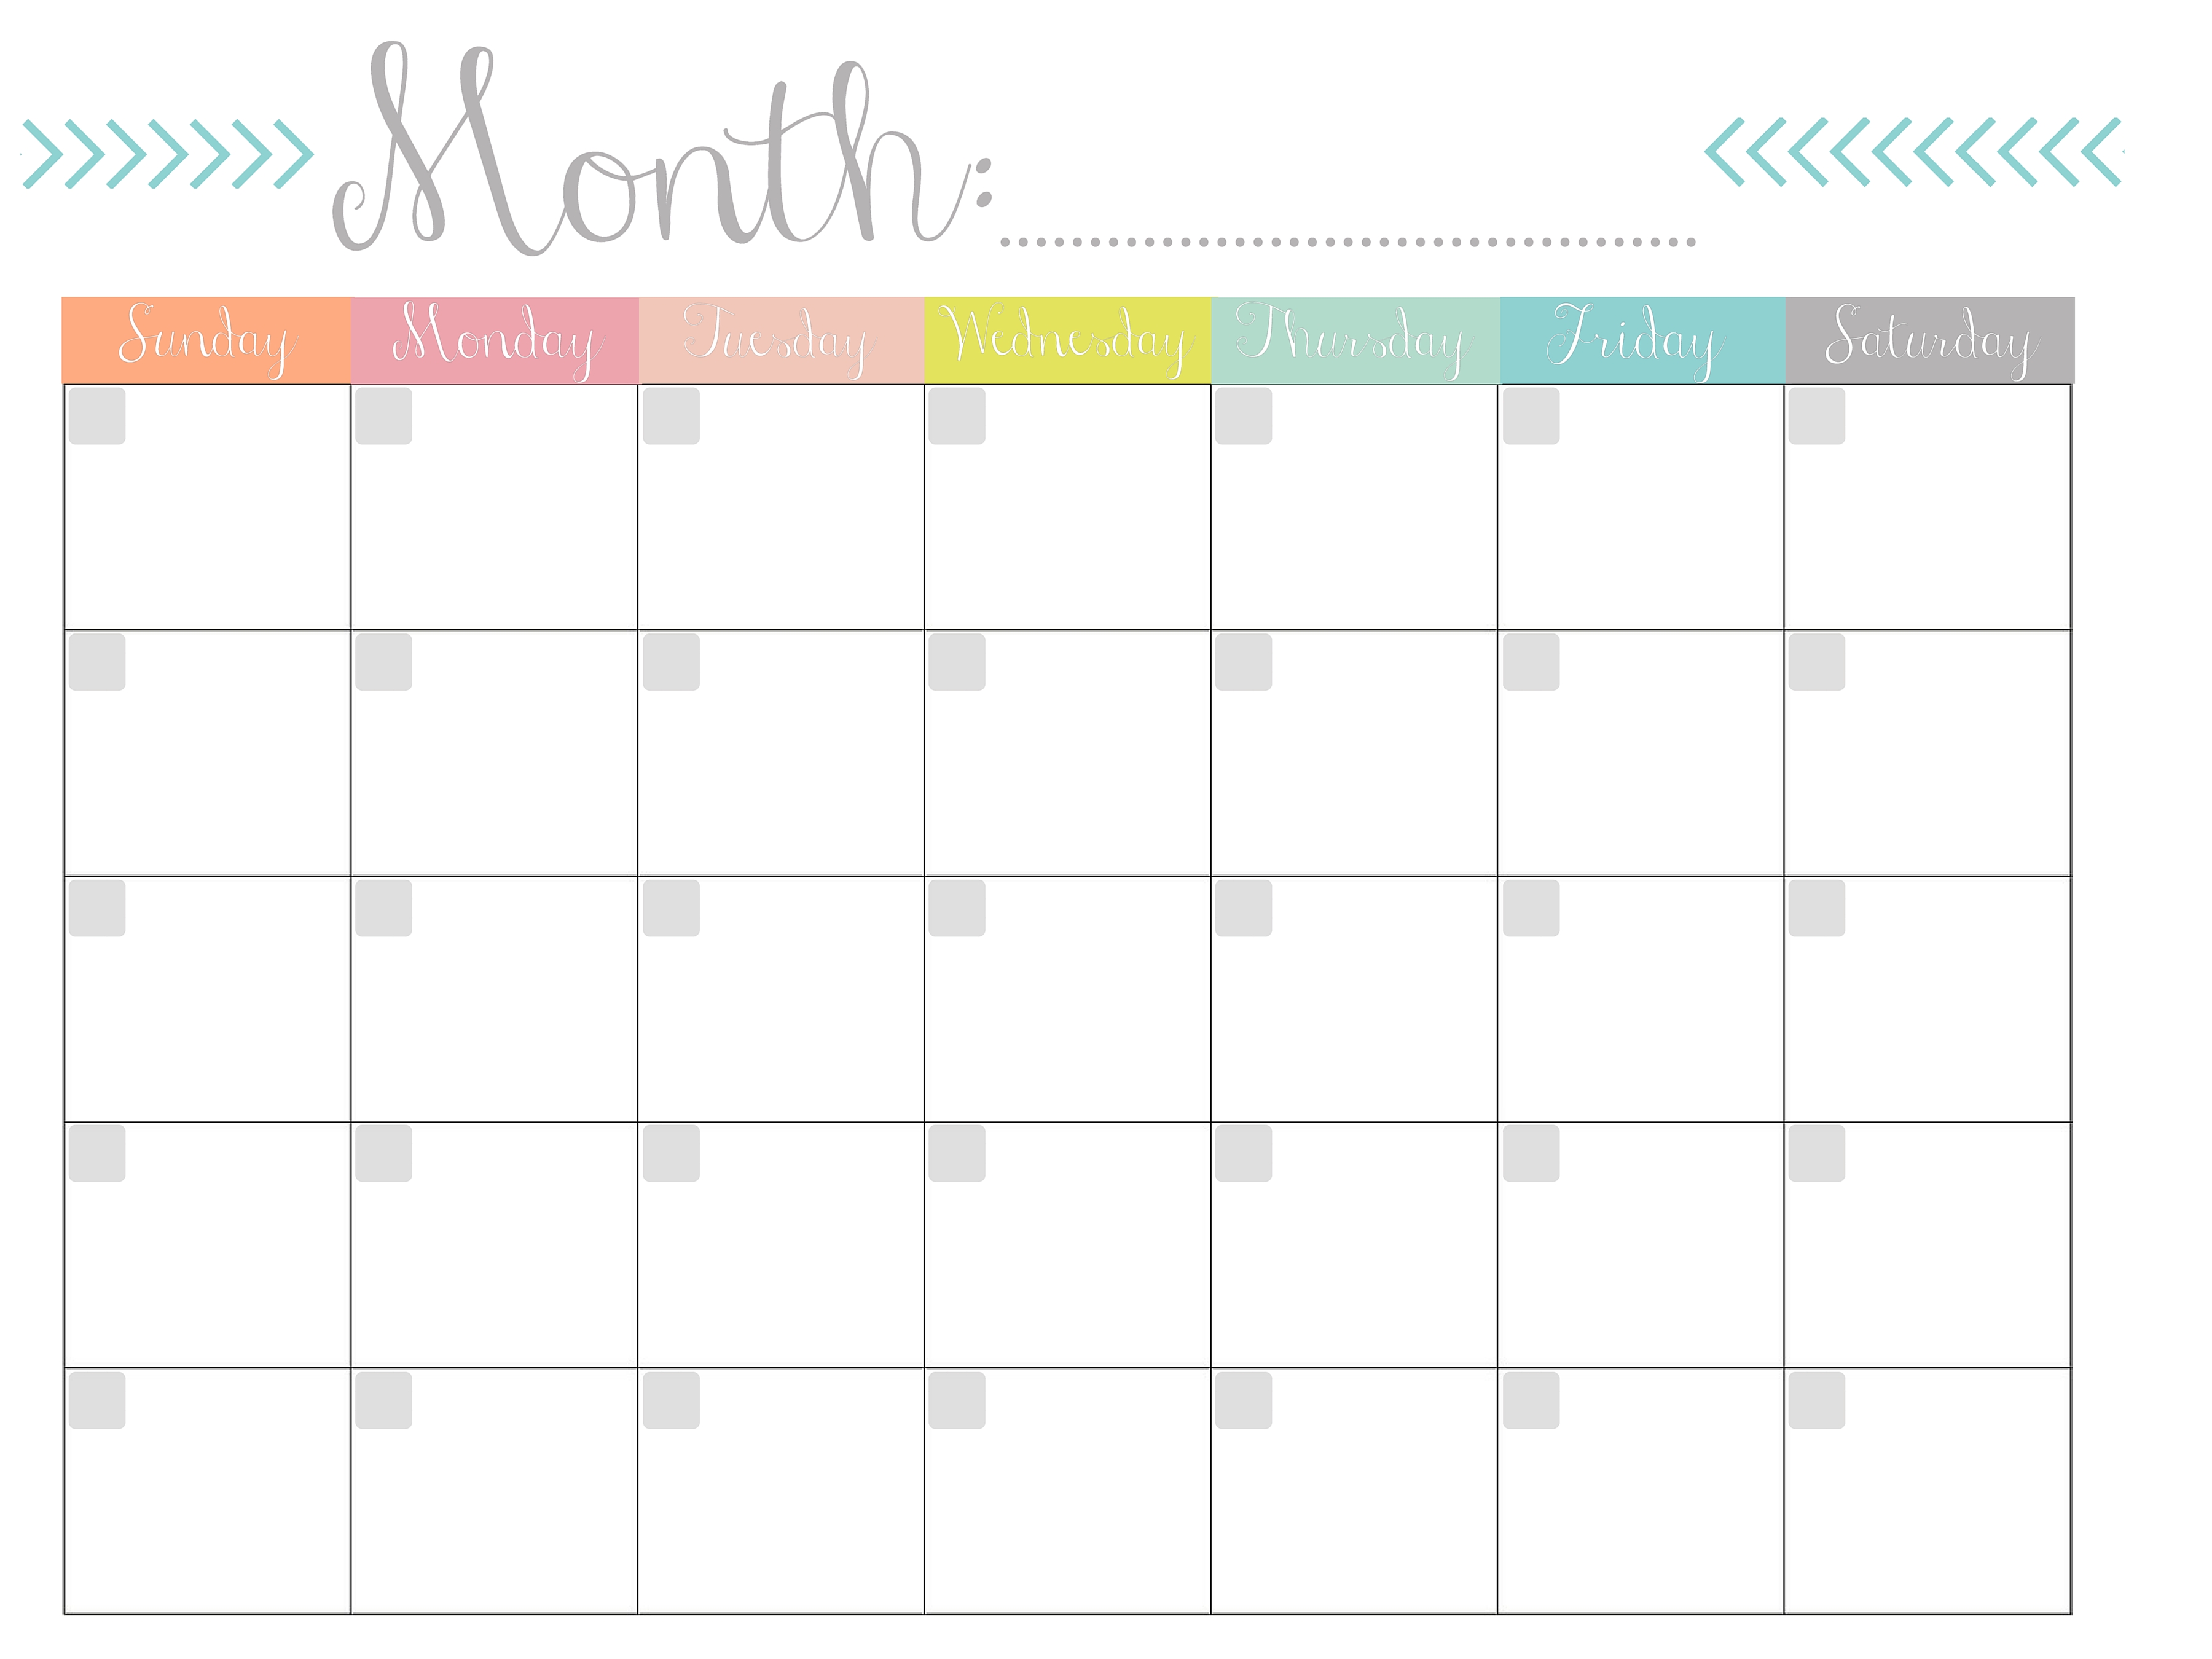 Printable Monthly Calander | hauck mansion